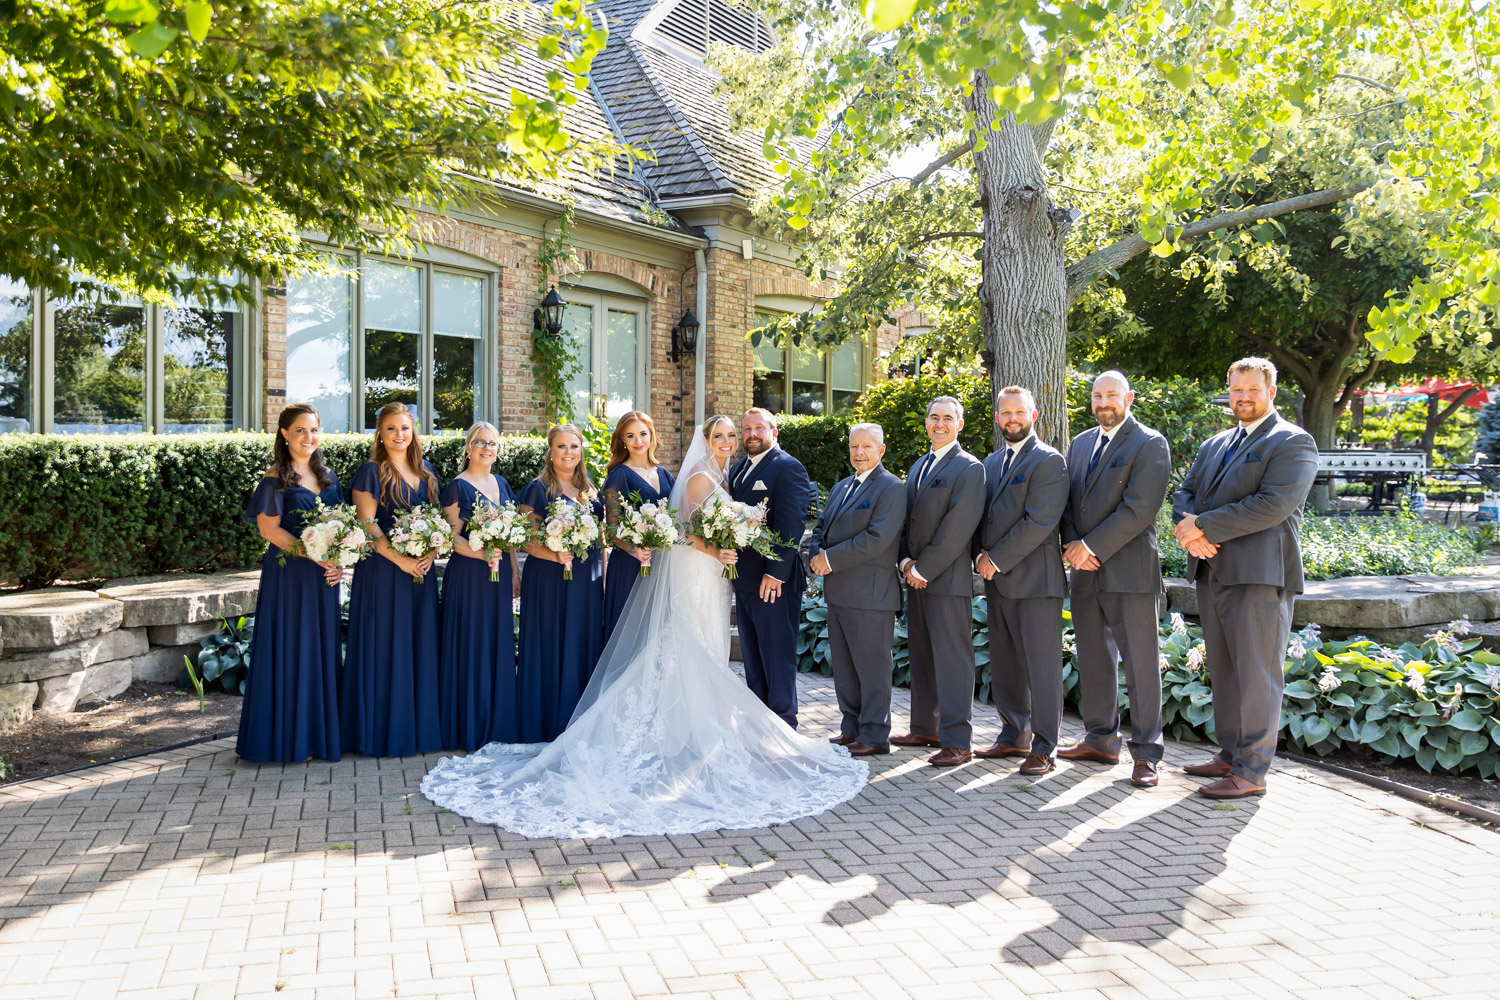 Newlyweds with their bridesmaids and groomsmans.